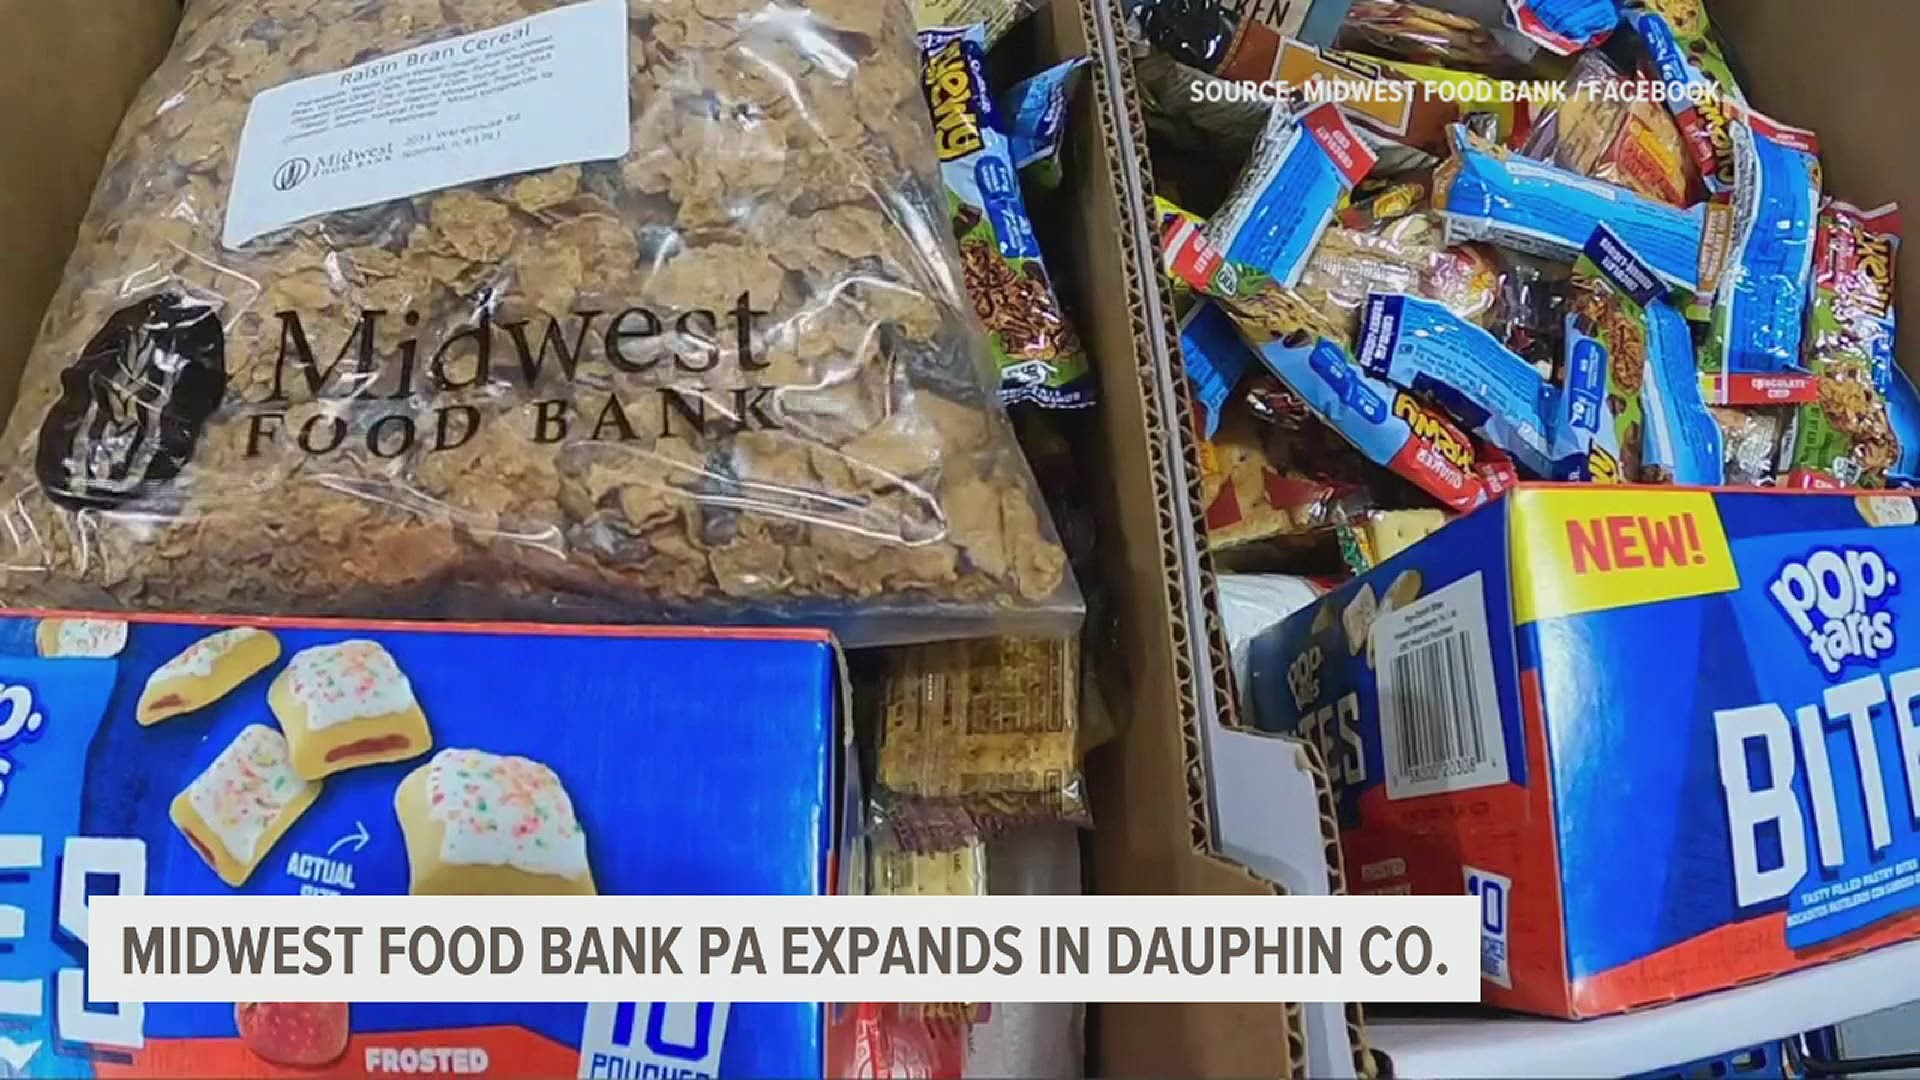 Midwest Food Bank Pa. will hold a ribbon cutting event at its new distribution center Friday morning. This is the food bank's first location in Pennsylvania.